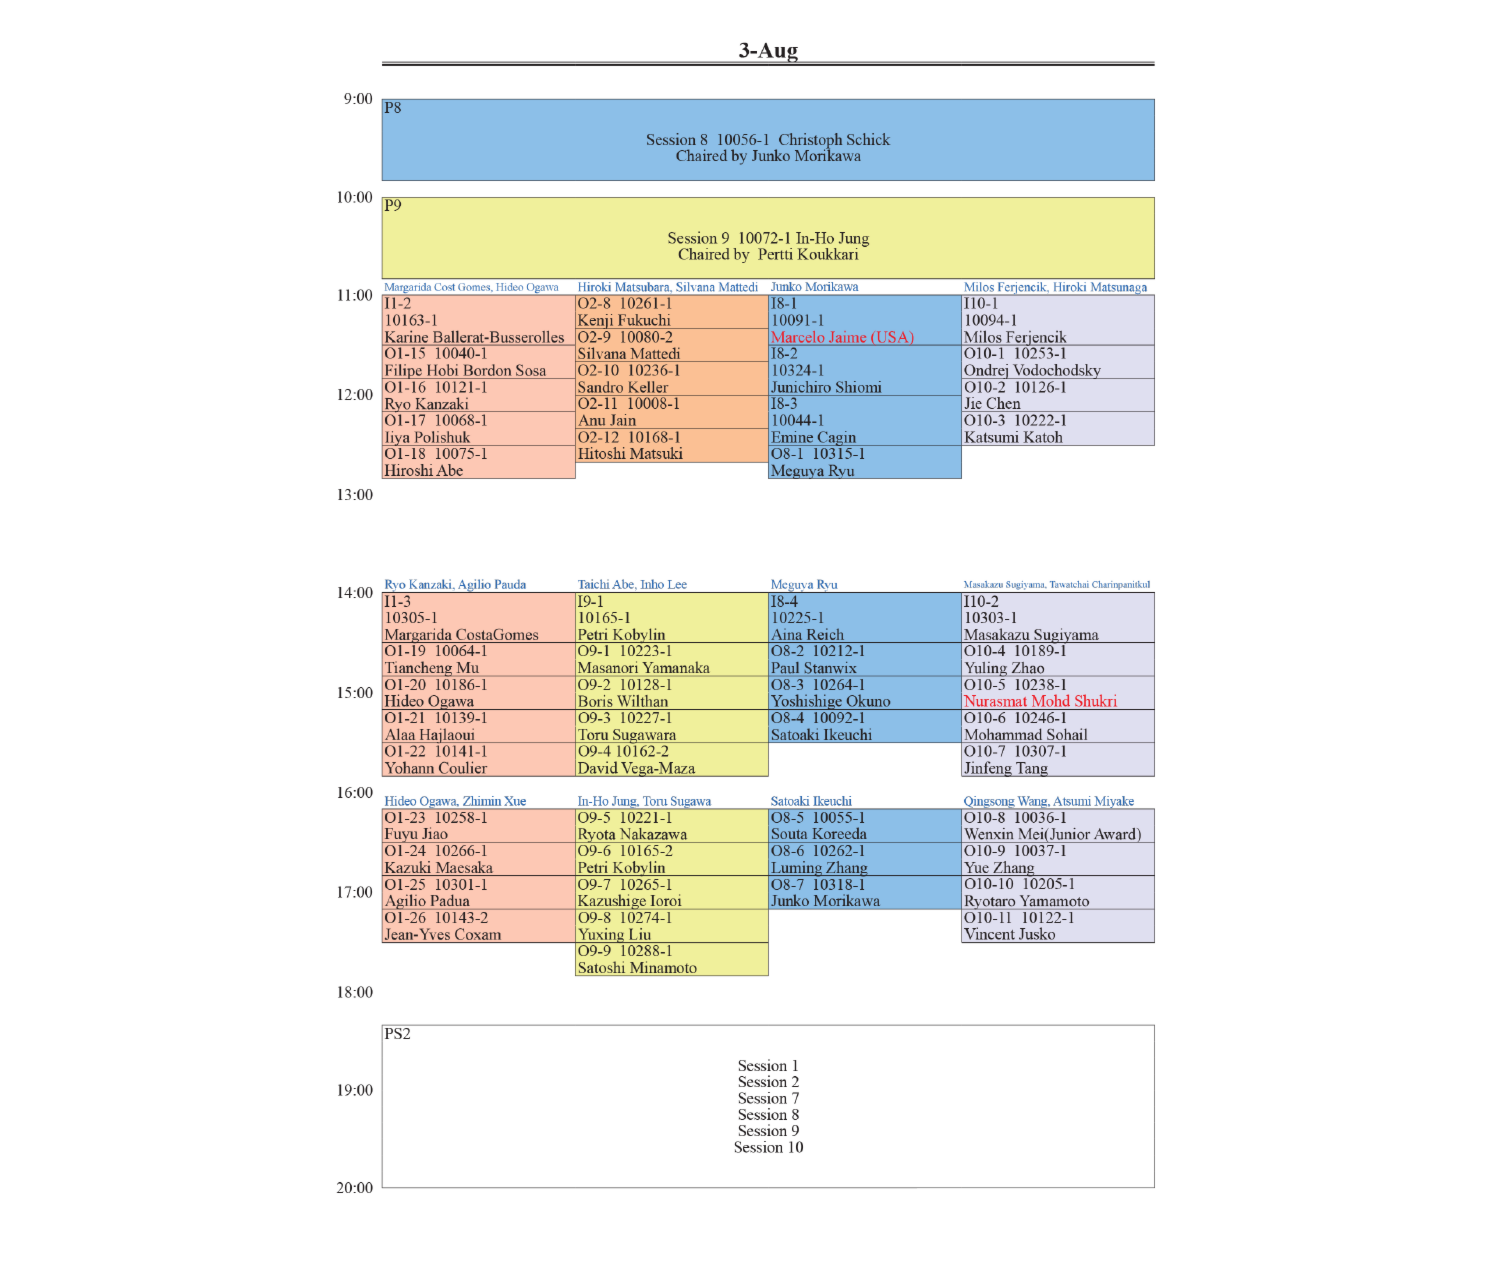 Table_Schedule_ICCT_2i (1)_2_2.png